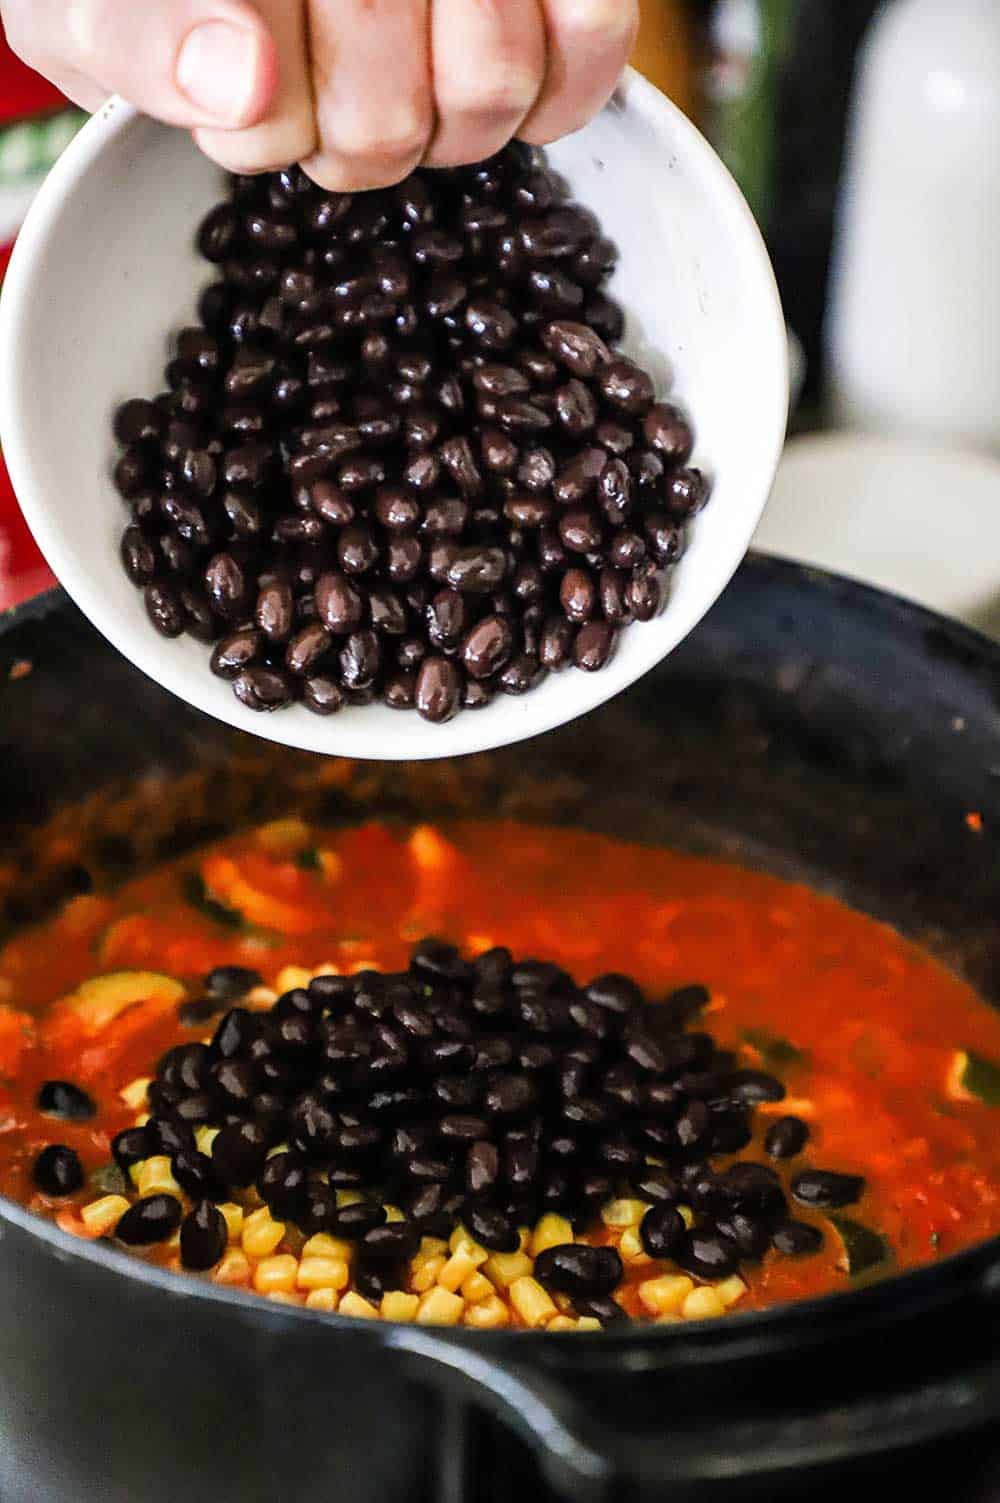 A person transferring black beans into a pot of chili.